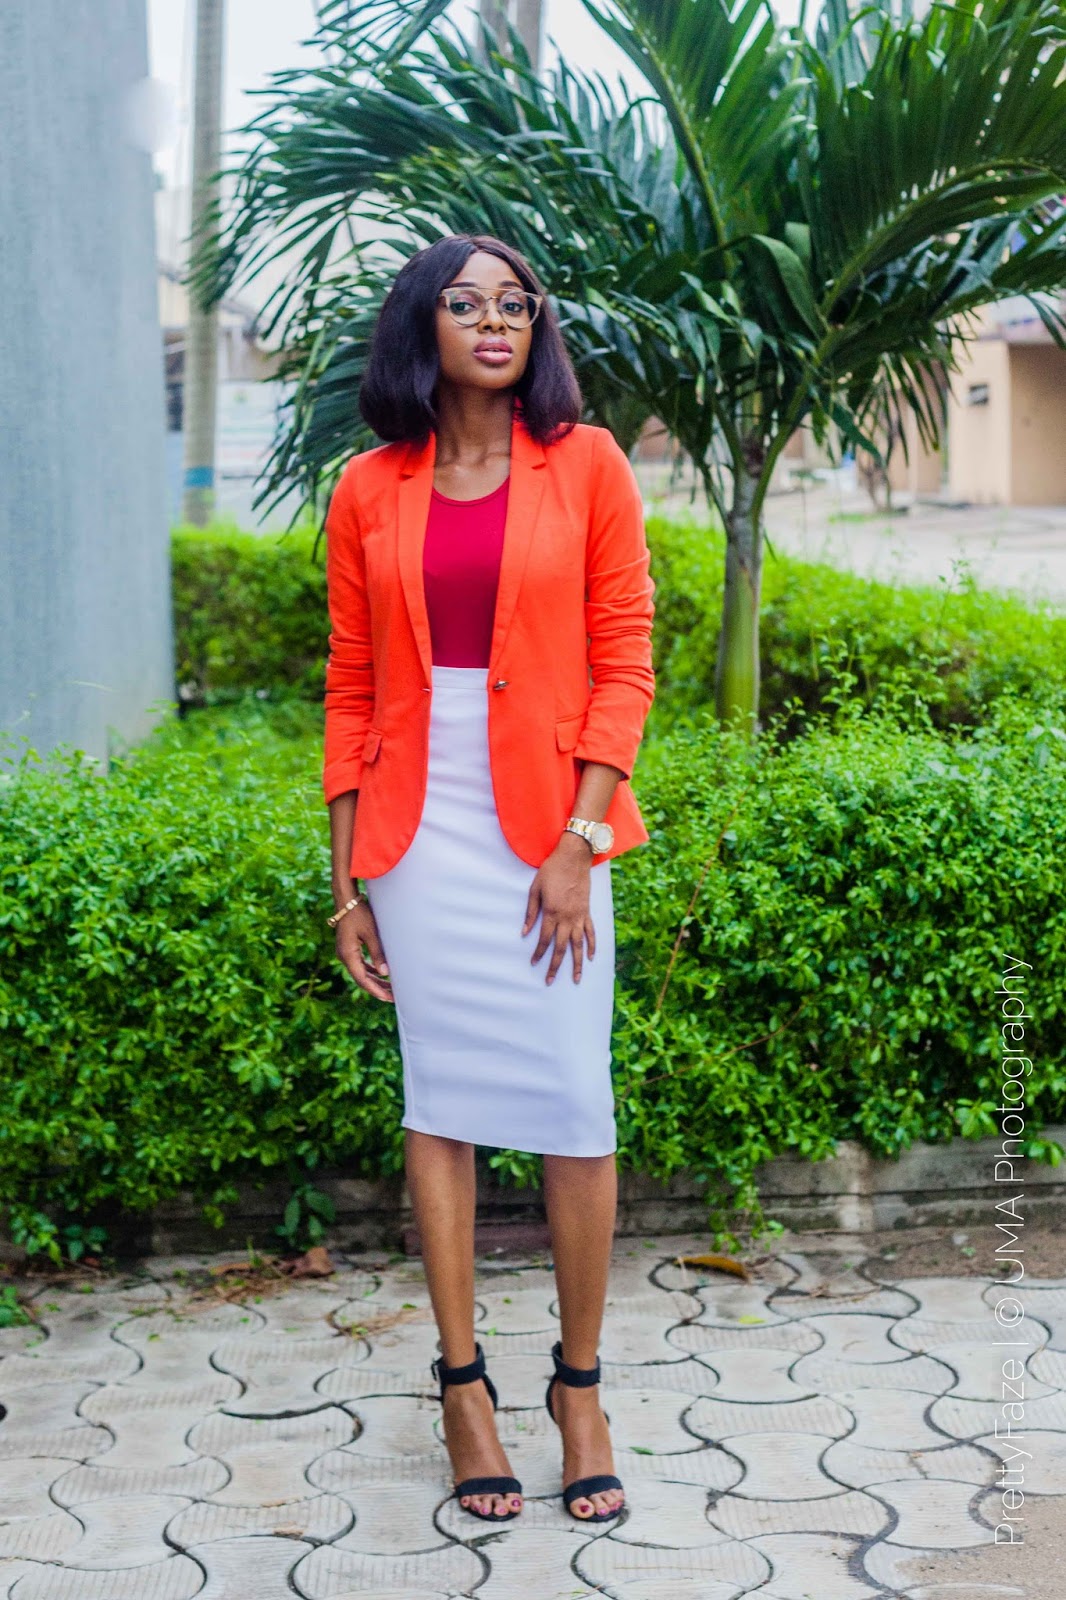 SIMPLE: THE NEW SMART #Workstyle6 - PAGES BY BUKKY